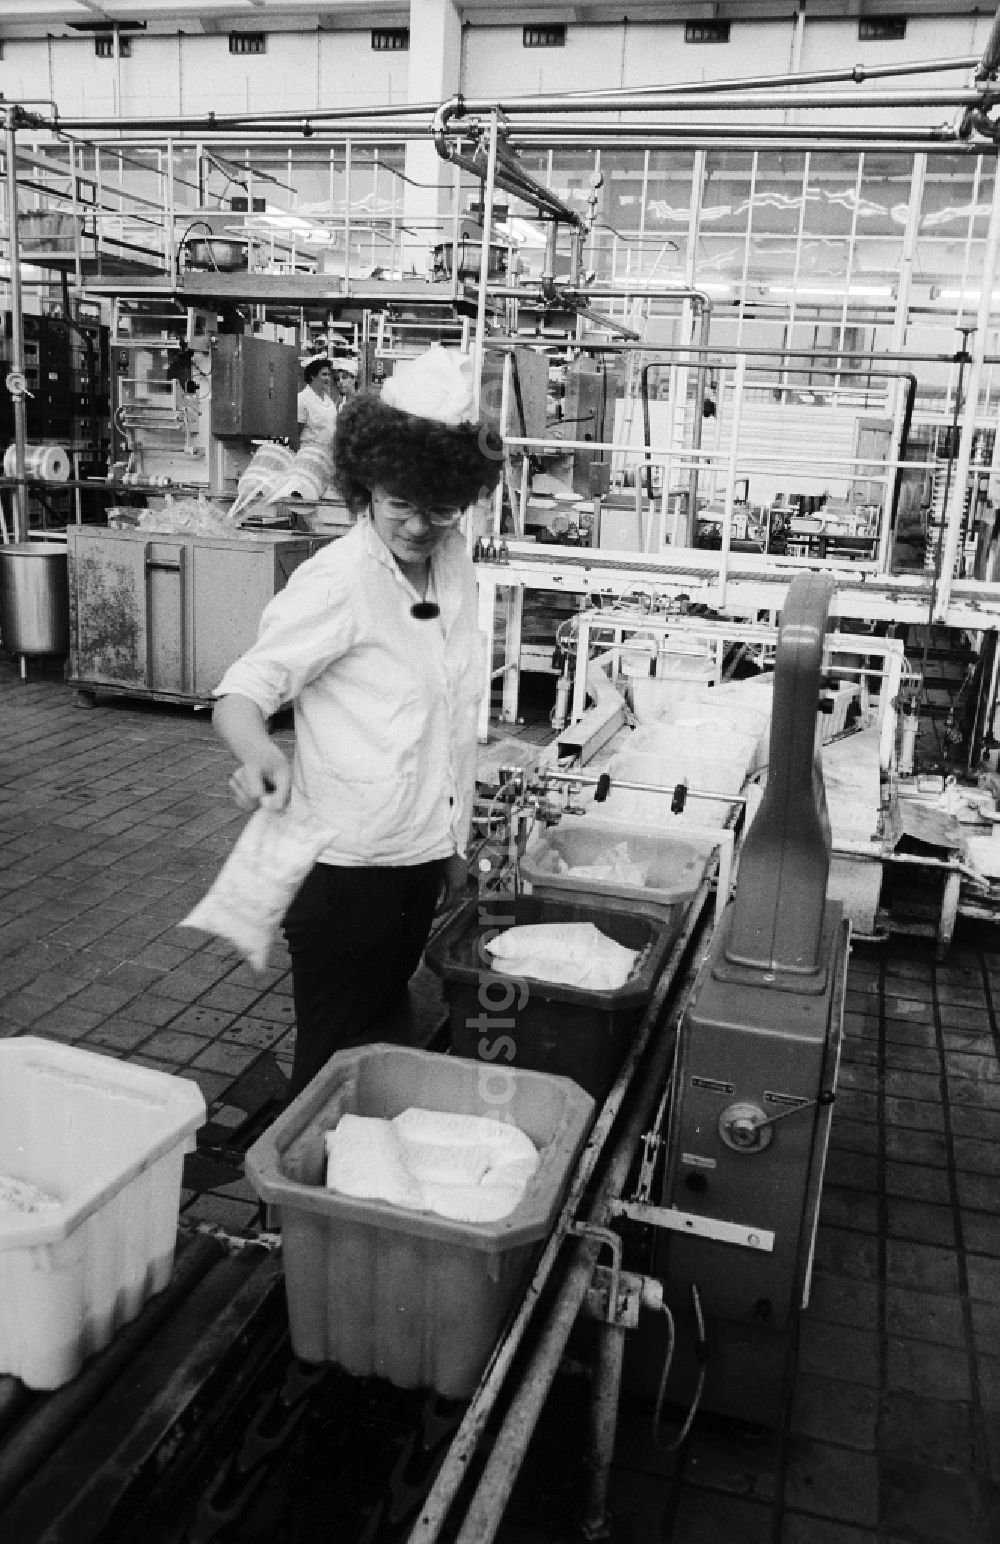 GDR photo archive: Berlin - An employee controls the tare weight of the fresh milk bags in the milk court VEB Berlin in Pankow Heiner's village in Berlin, the former capital of the GDR, German democratic republic